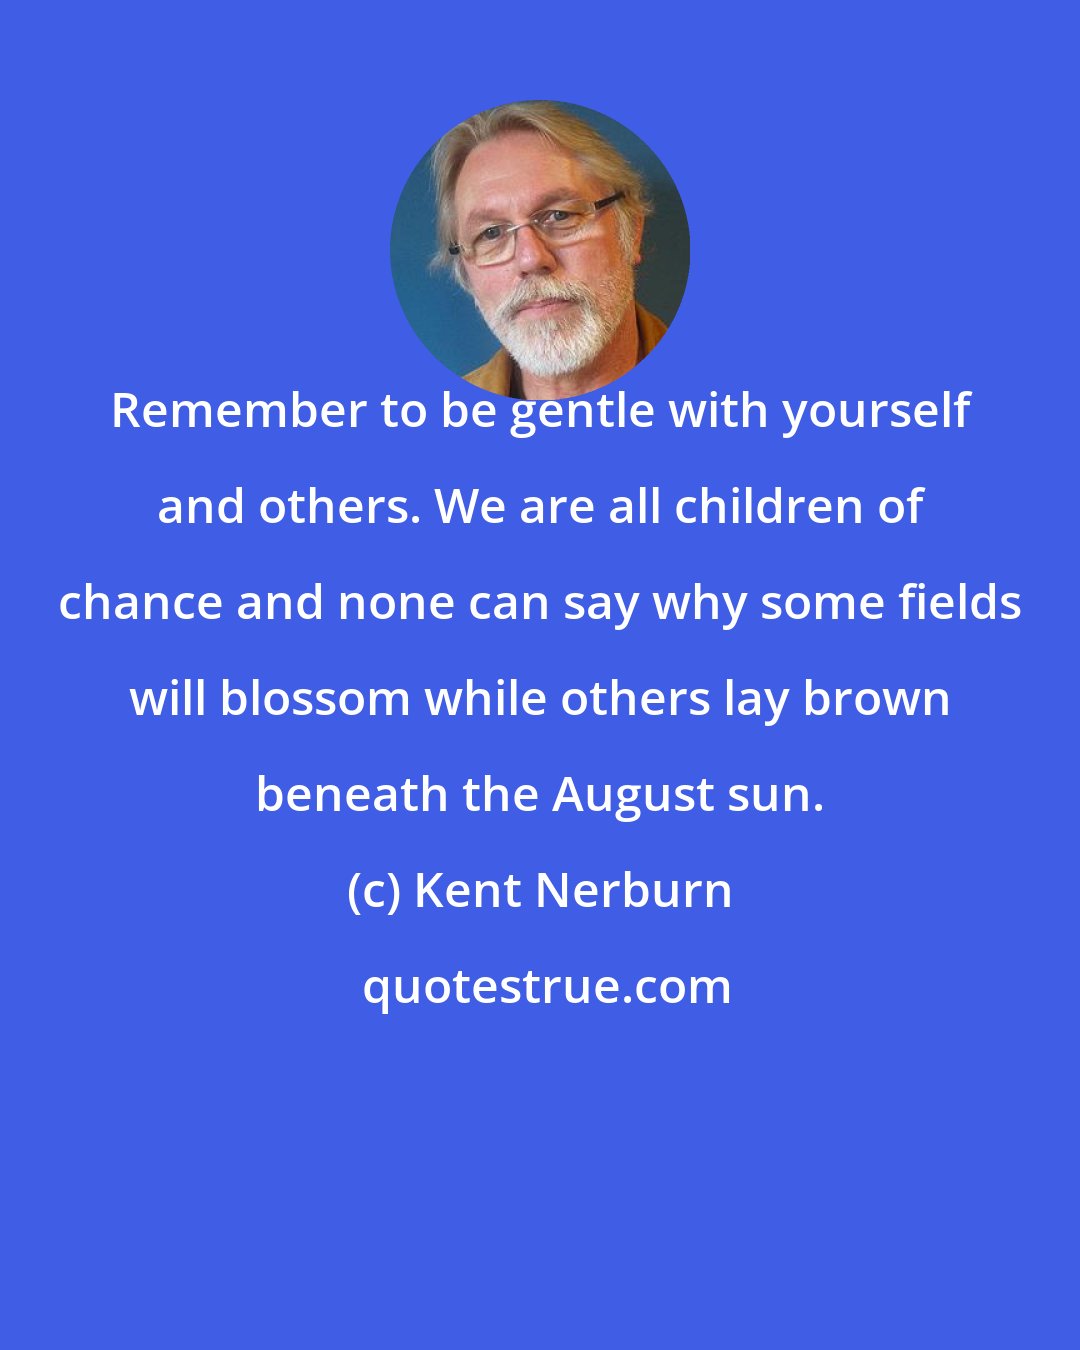 Kent Nerburn: Remember to be gentle with yourself and others. We are all children of chance and none can say why some fields will blossom while others lay brown beneath the August sun.